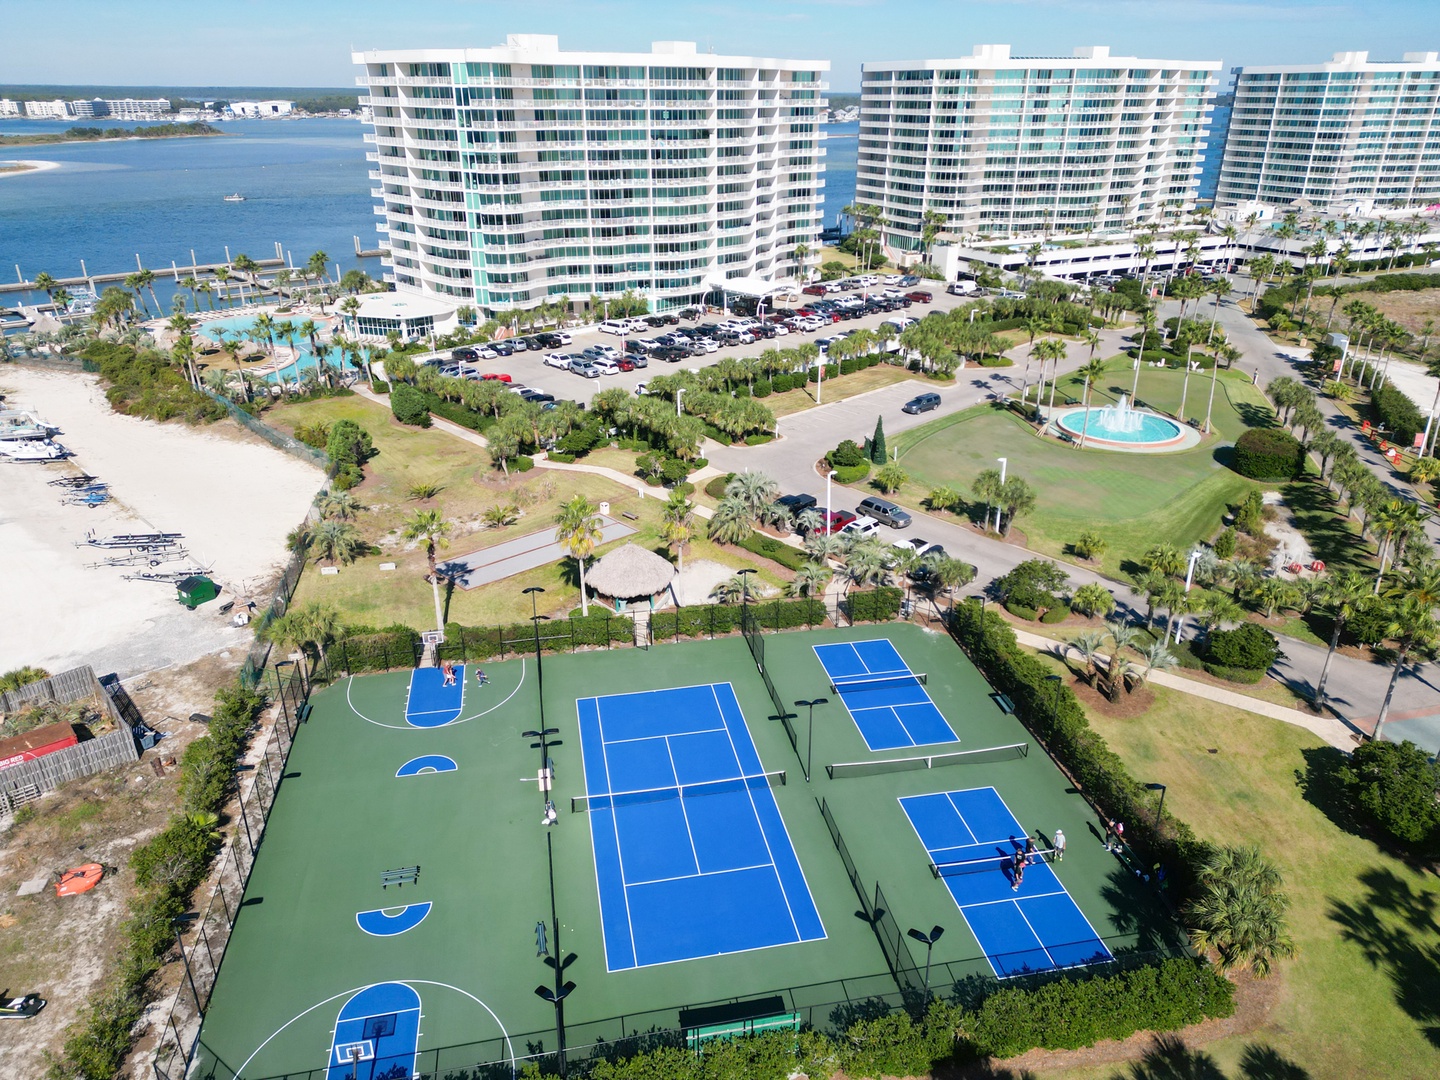 Tennis, Pickle Ball and basketball courts